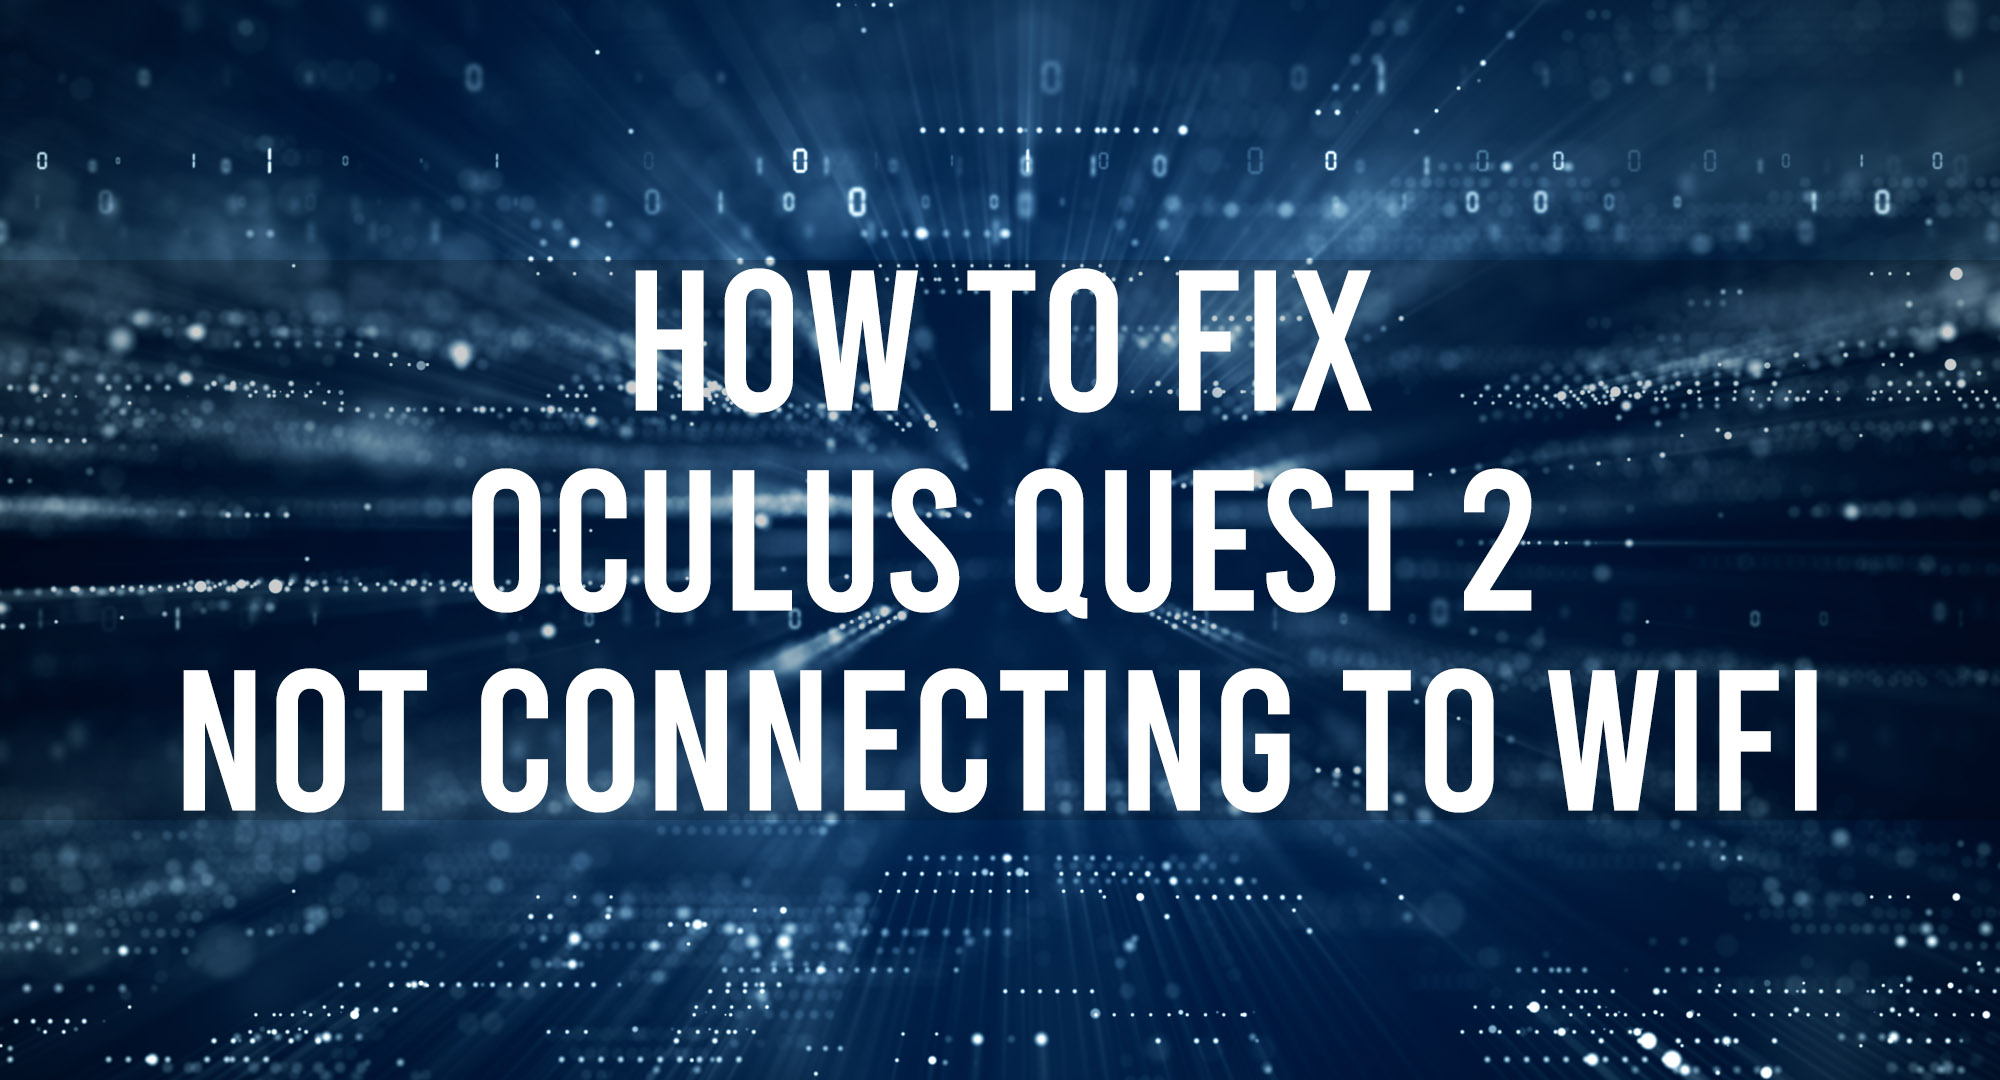 Oculus Quest 2 Not Connecting to WiFi